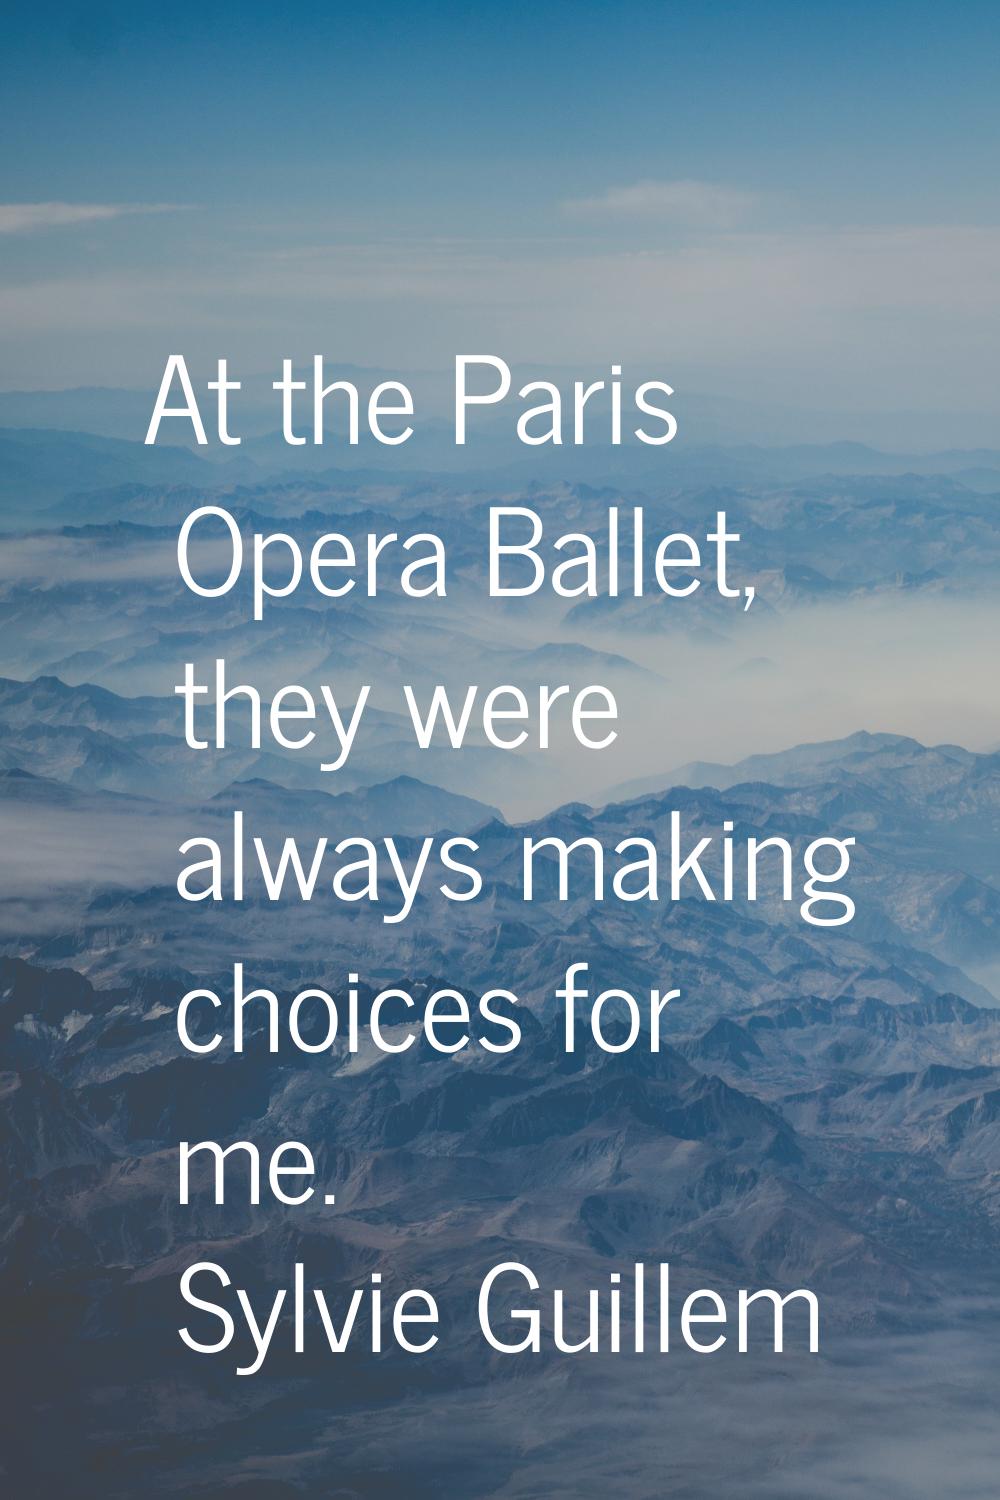 At the Paris Opera Ballet, they were always making choices for me.